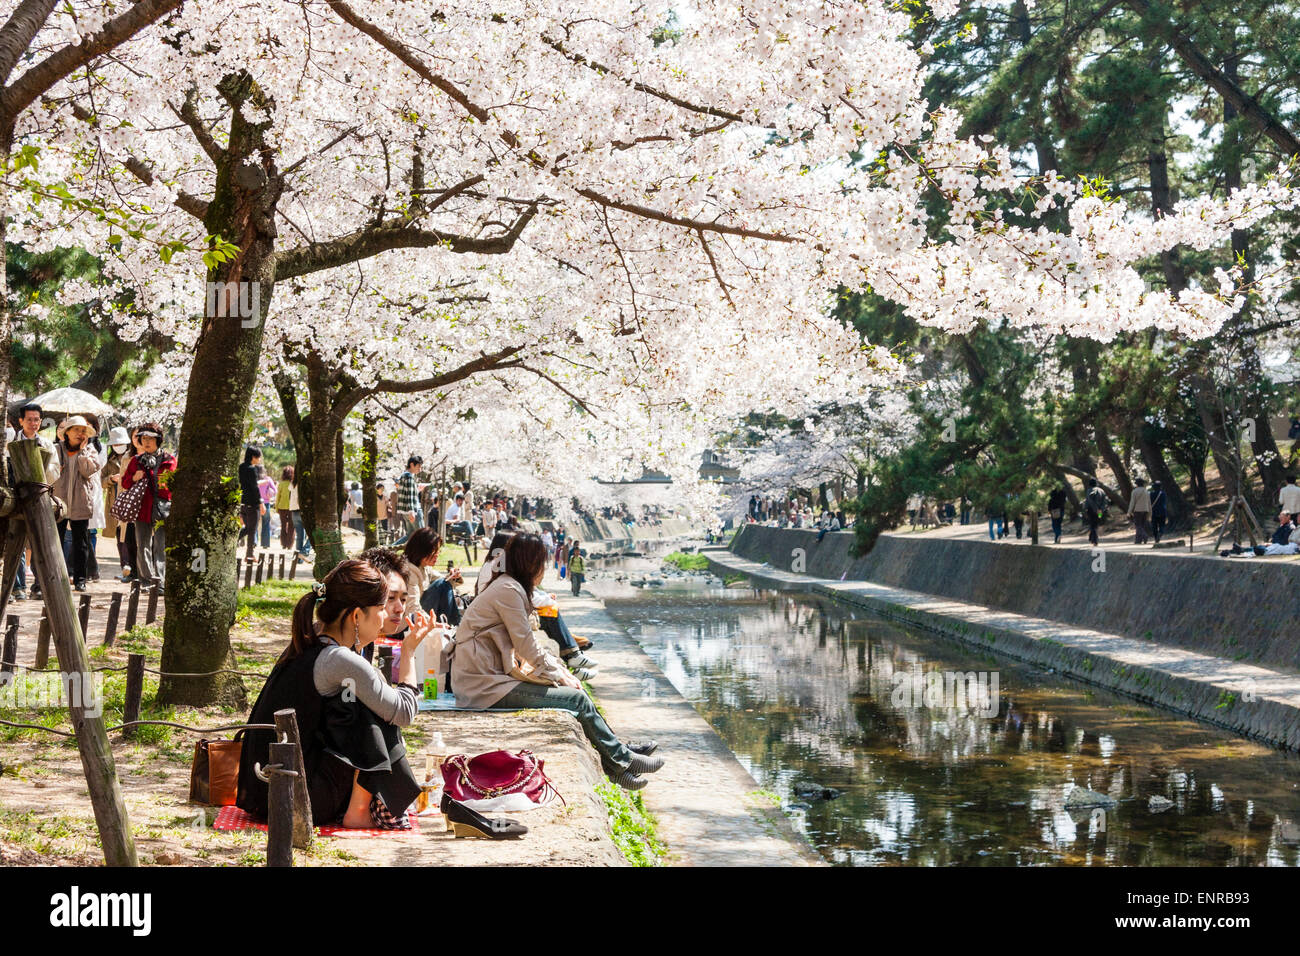 Crowded springtime scene of people walking under rows of cherry blossom tress while others sitting in groups picnicking by the Shukugawa river, Japan. Stock Photo